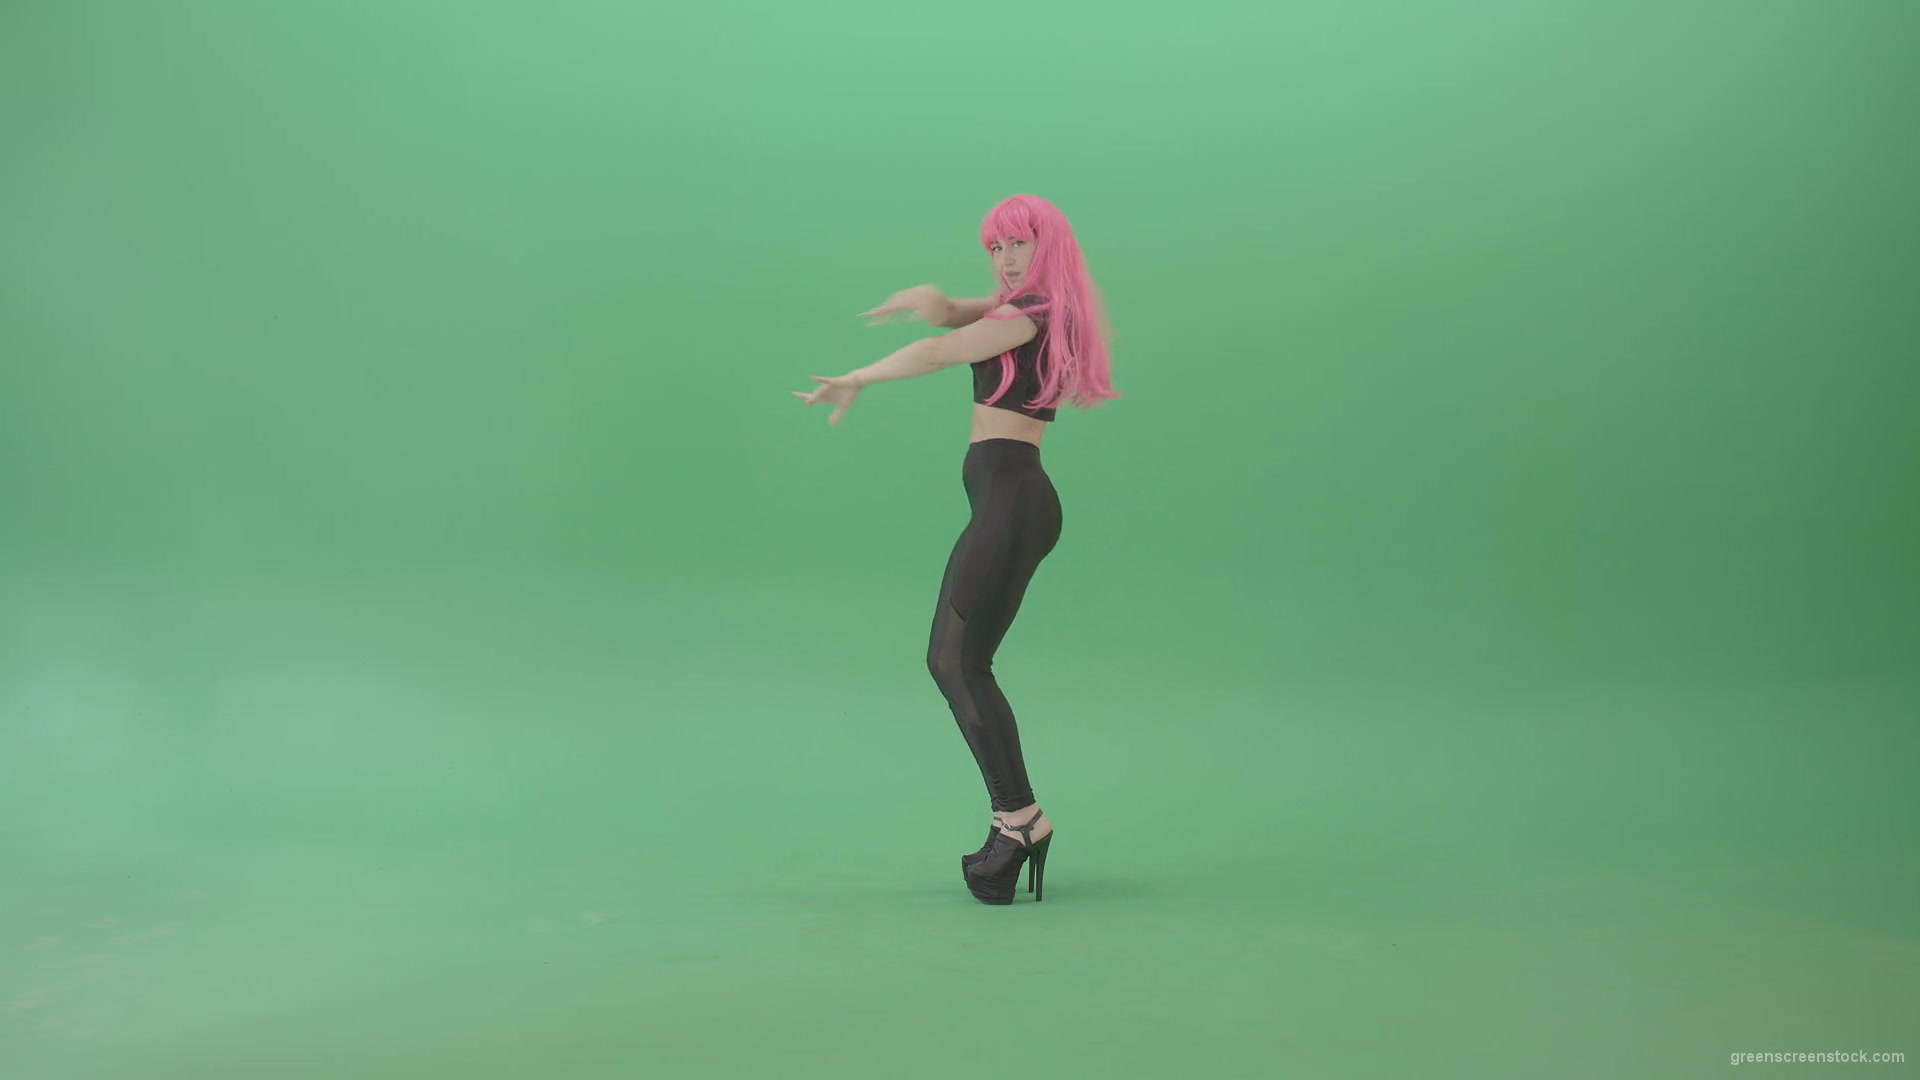 Pink-hair-girl-showing-sexy-moves-dancing-strip-on-green-screen-4K-Video-Footage-1920_009 Green Screen Stock